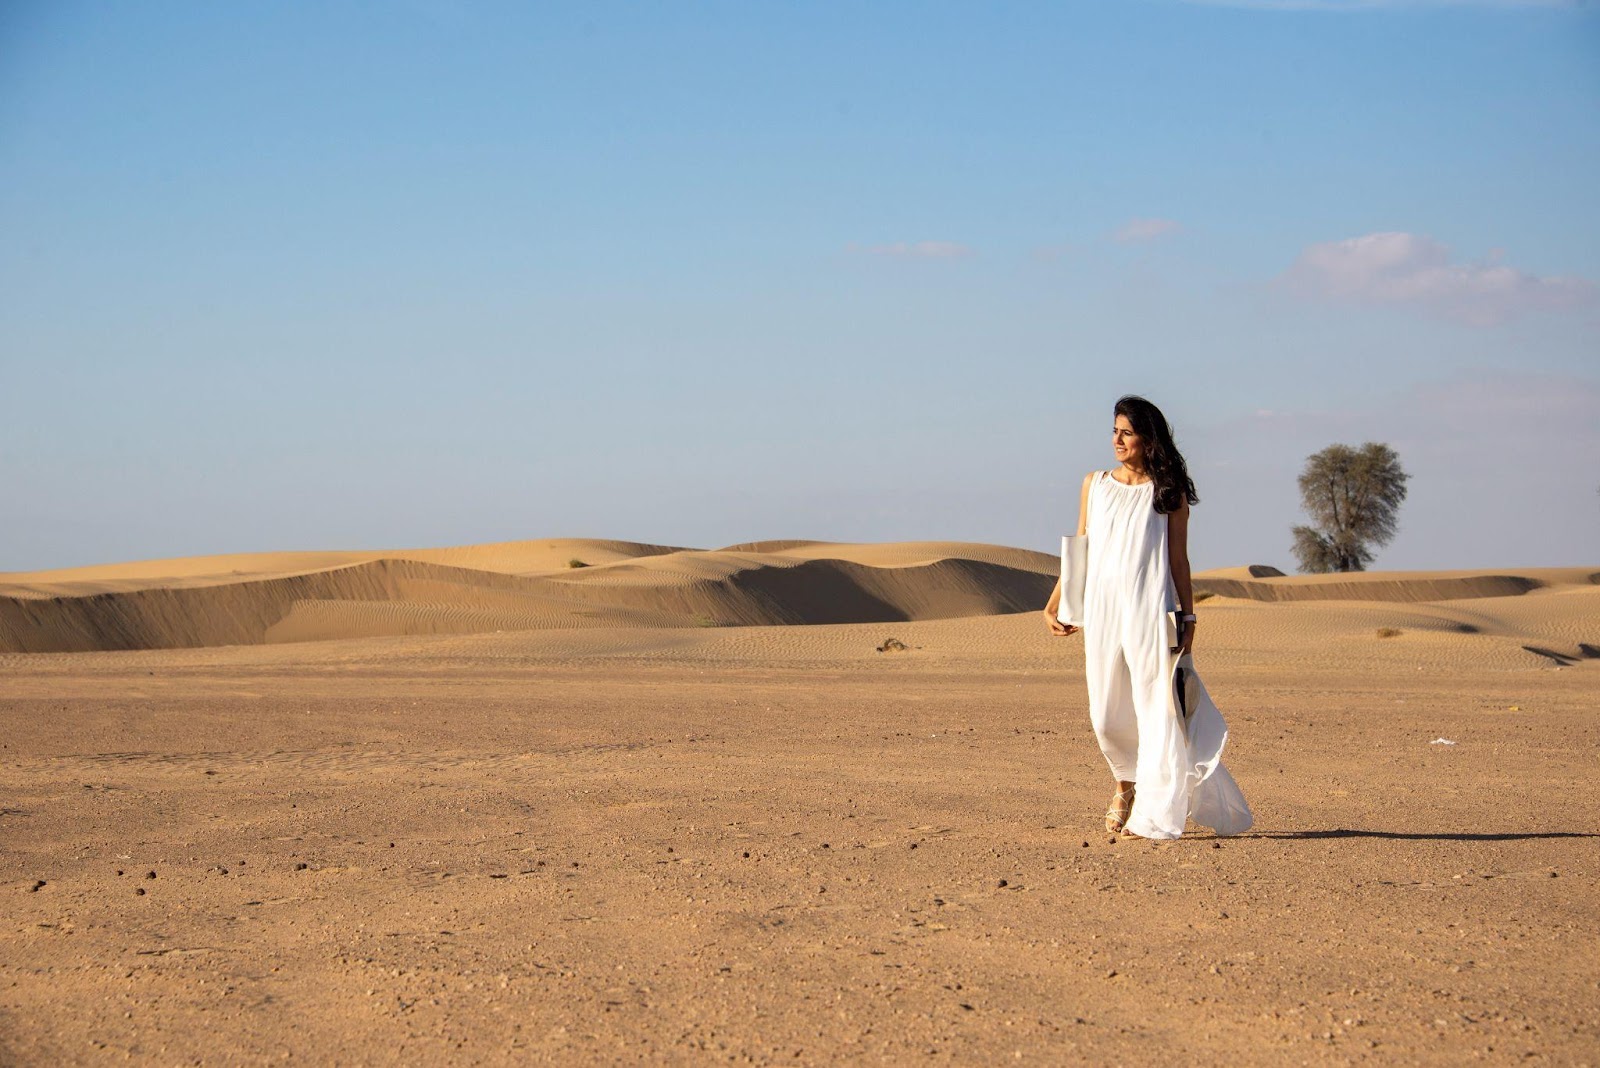 strict-dress-code-what-to-wear-while-traveling-in-the-uae